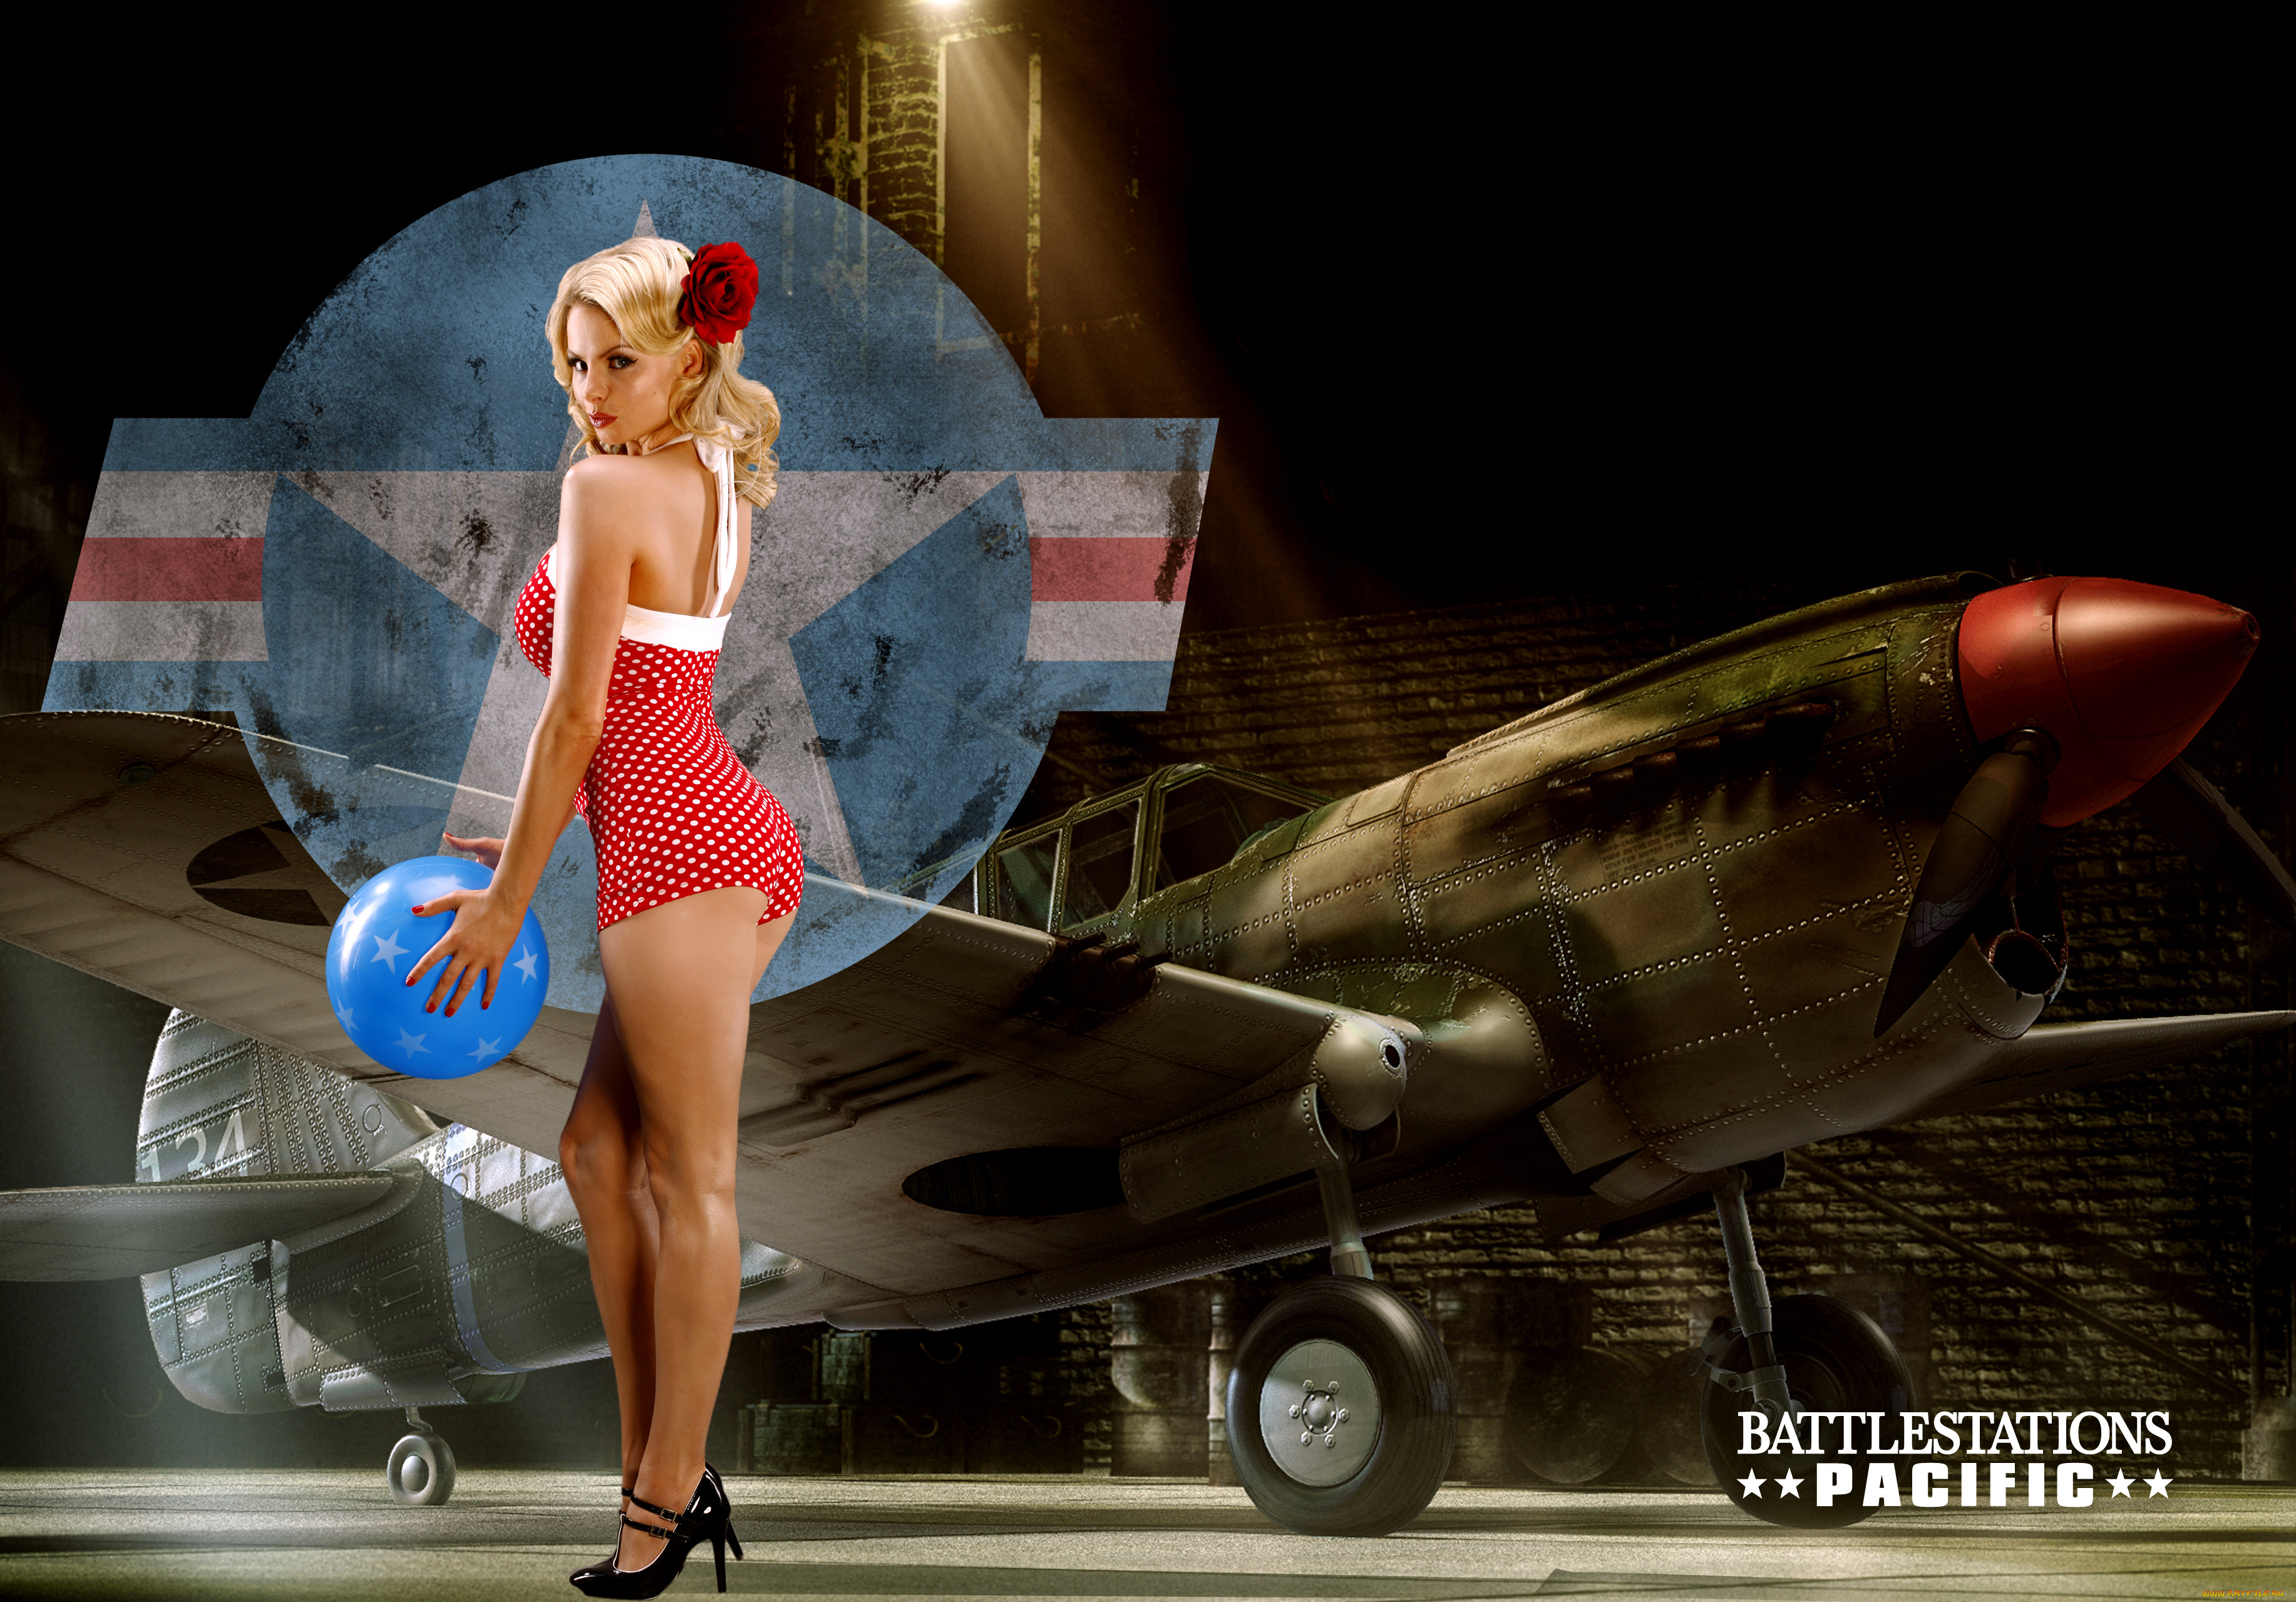 видео, игры, battlestations, , pacific, woman, airplane, lingerie, red, pin-up, blonde